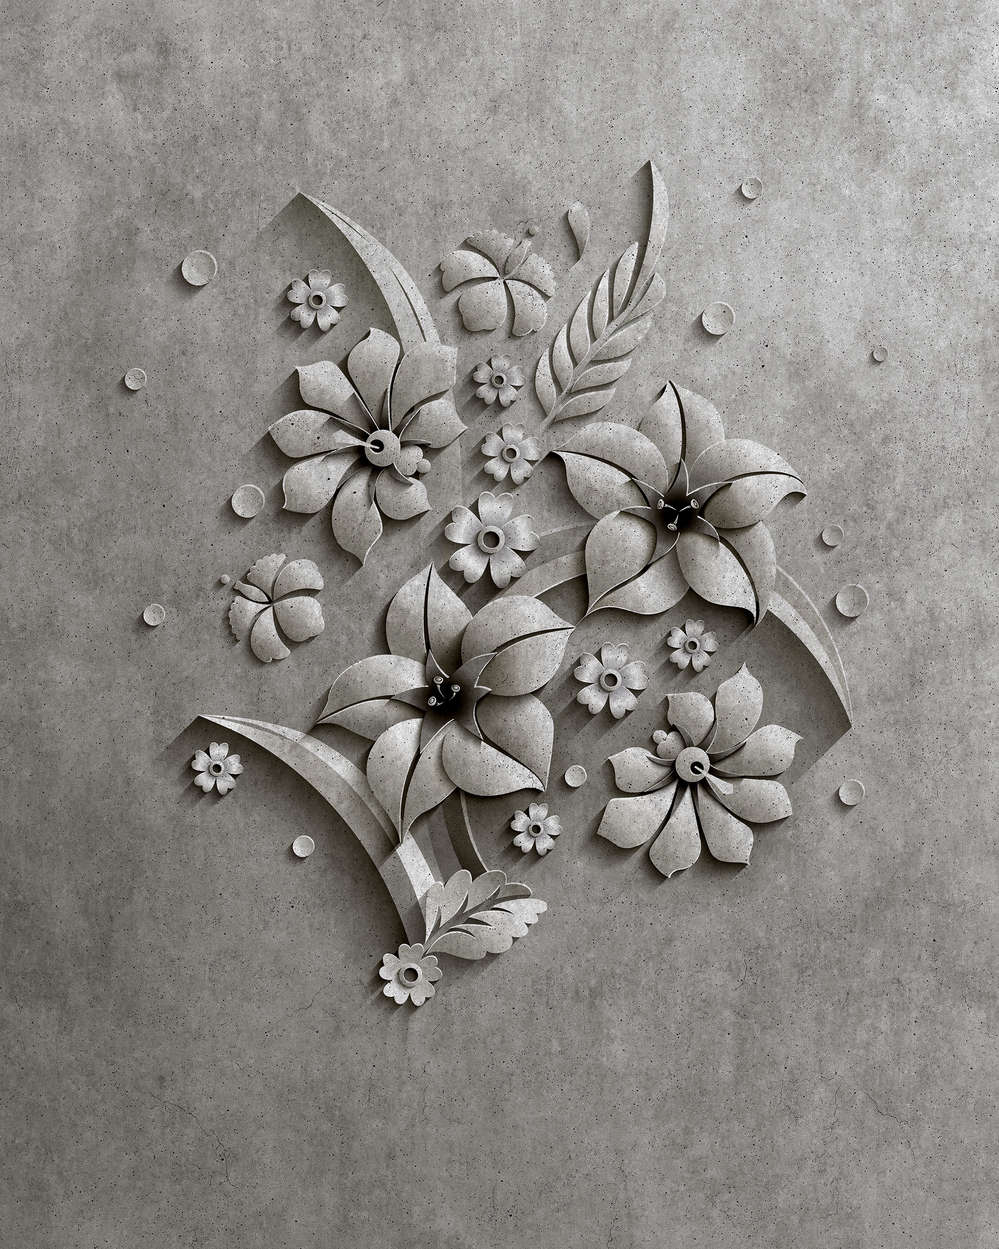             Relief 1 - Photo wallpaper in concrete structure of a flower relief - Grey, Black | Premium smooth non-woven
        